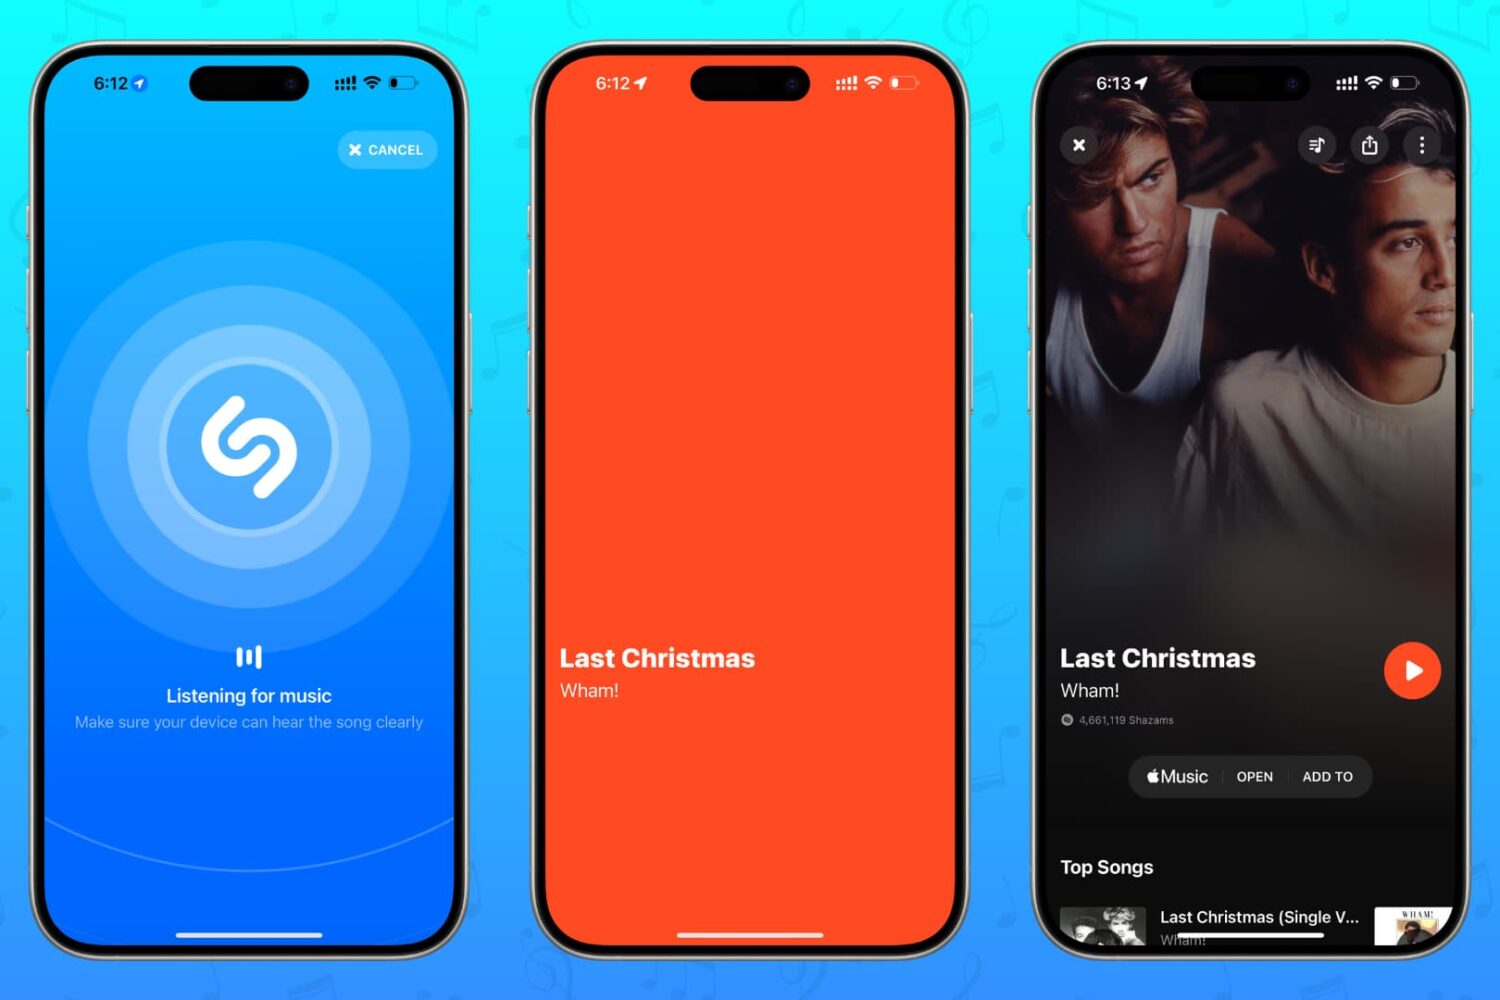 Using Shazam on iPhone to identify an unknown song